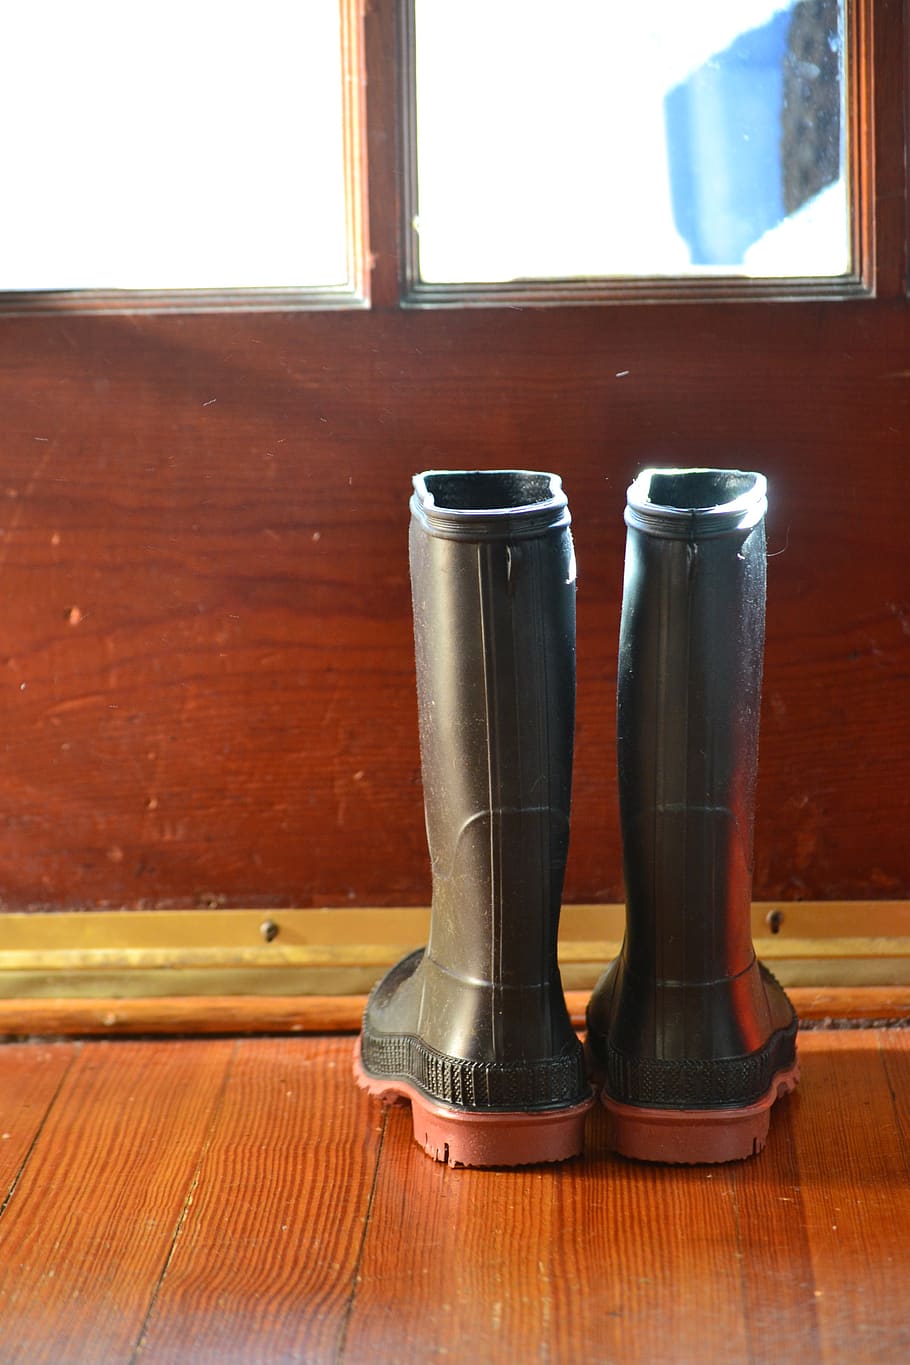 boots, rainy day, weather, kids, spring, indoors, wood - material, window, day, table